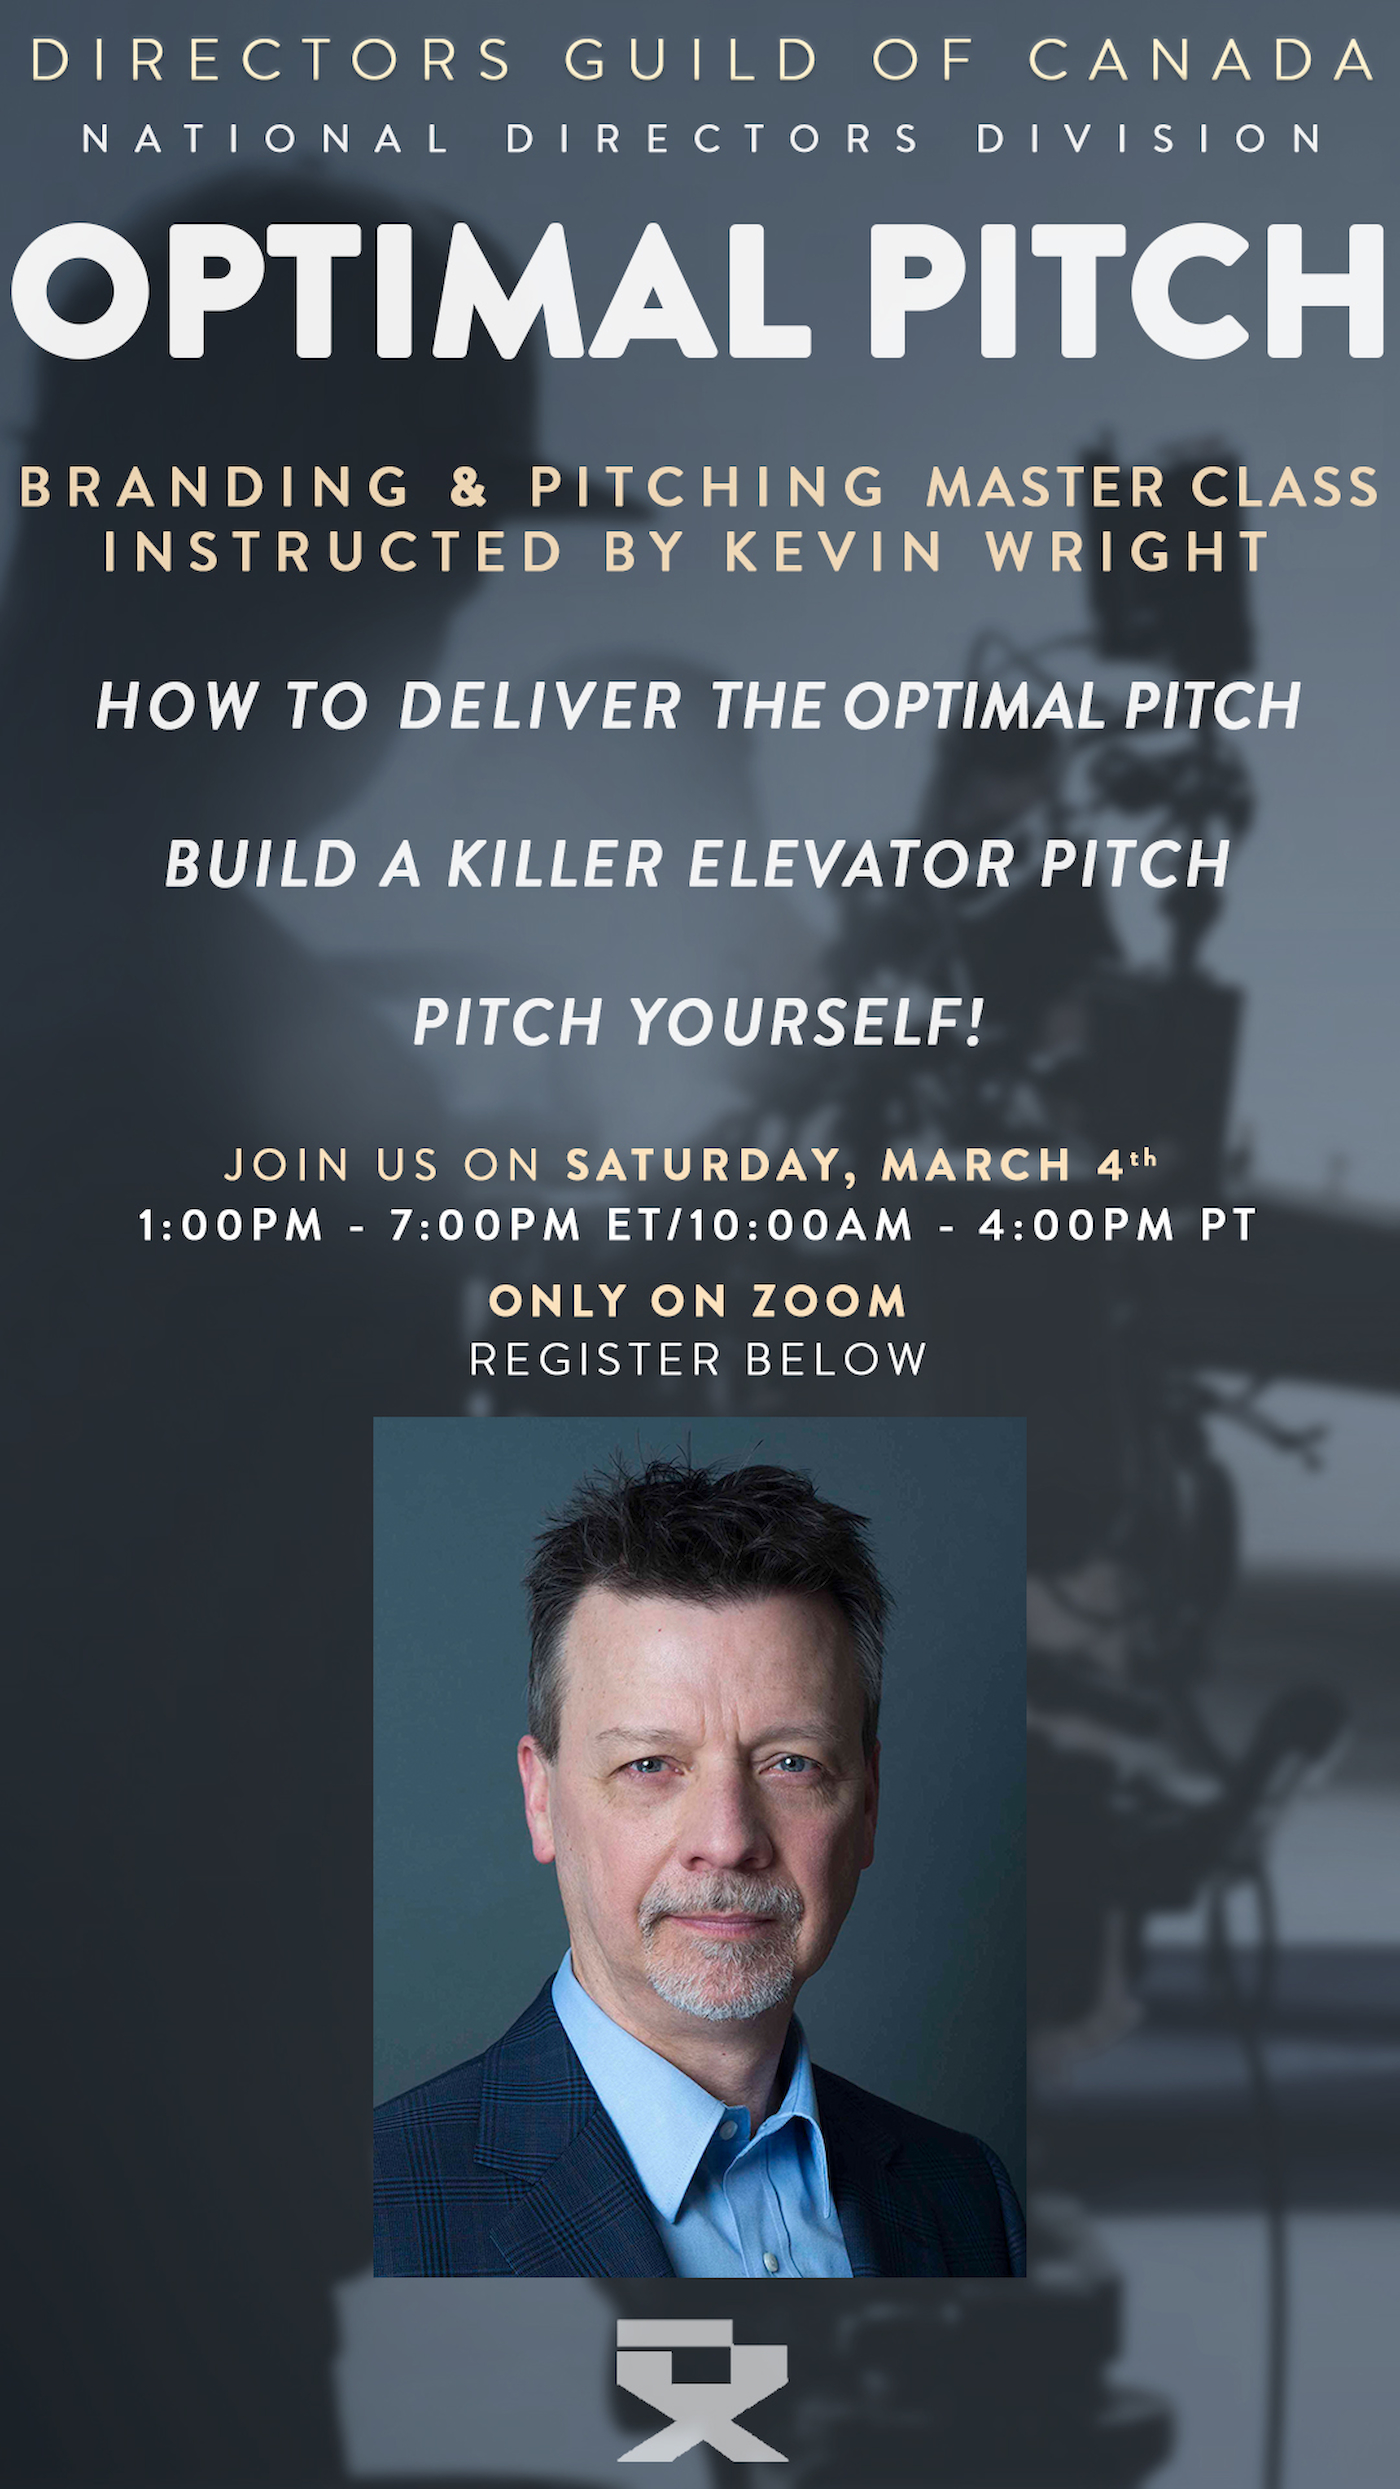 Optimal Pitch with Kevin Wright